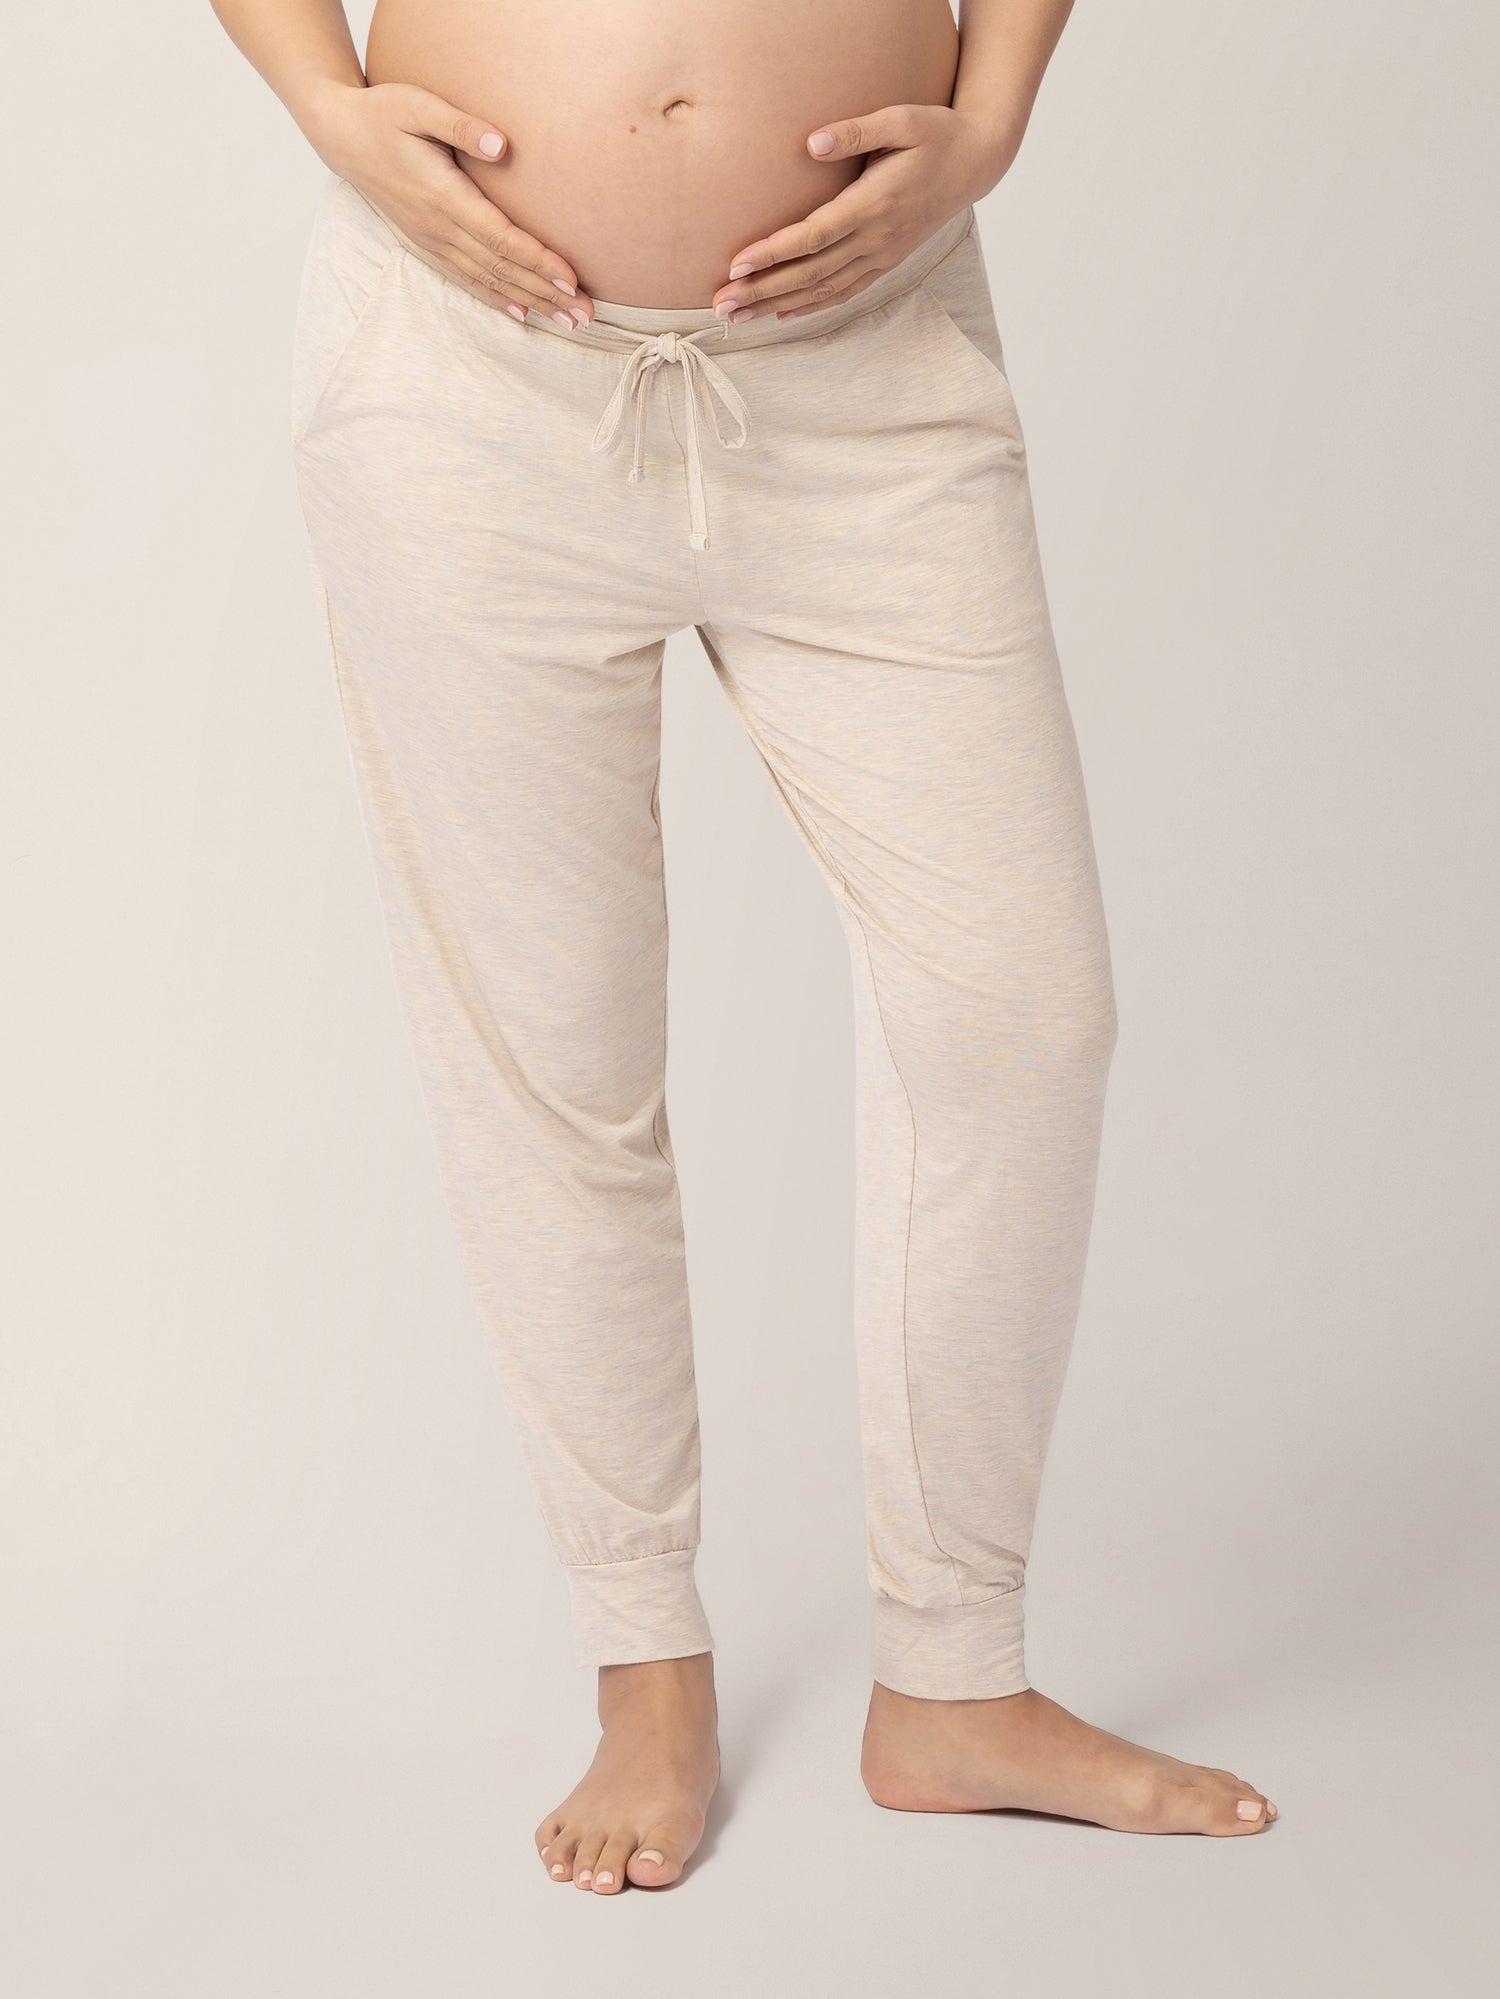 Oatmeal Beige Everyday Comfy Joggers